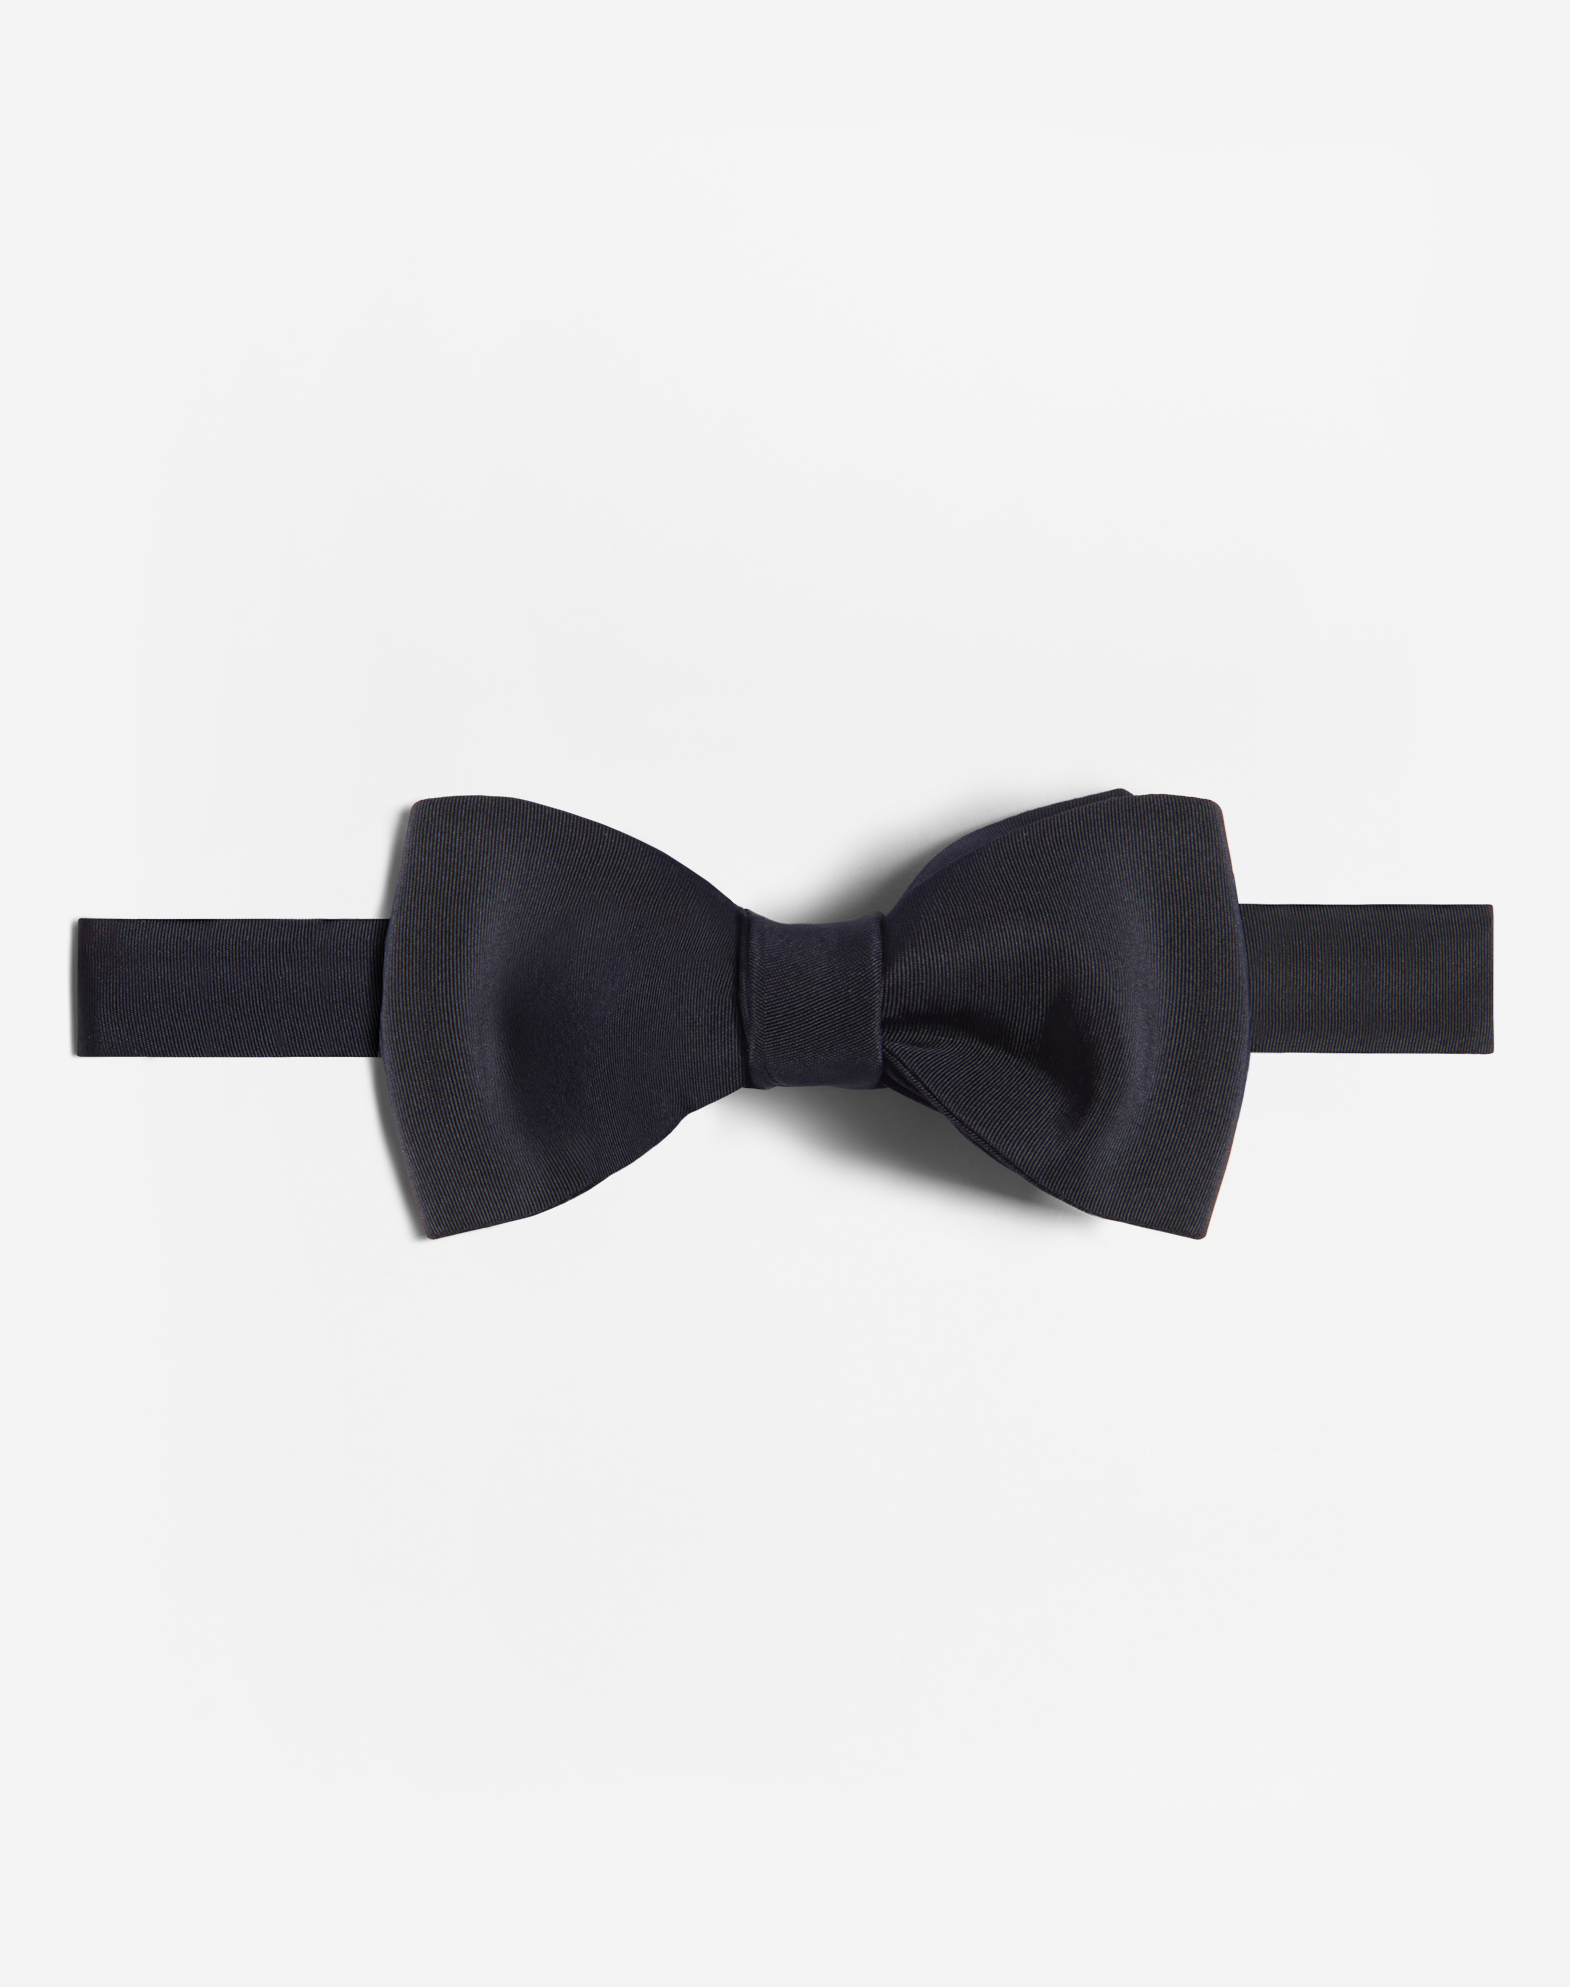 Dunhill Luxury Men's Bow Ties